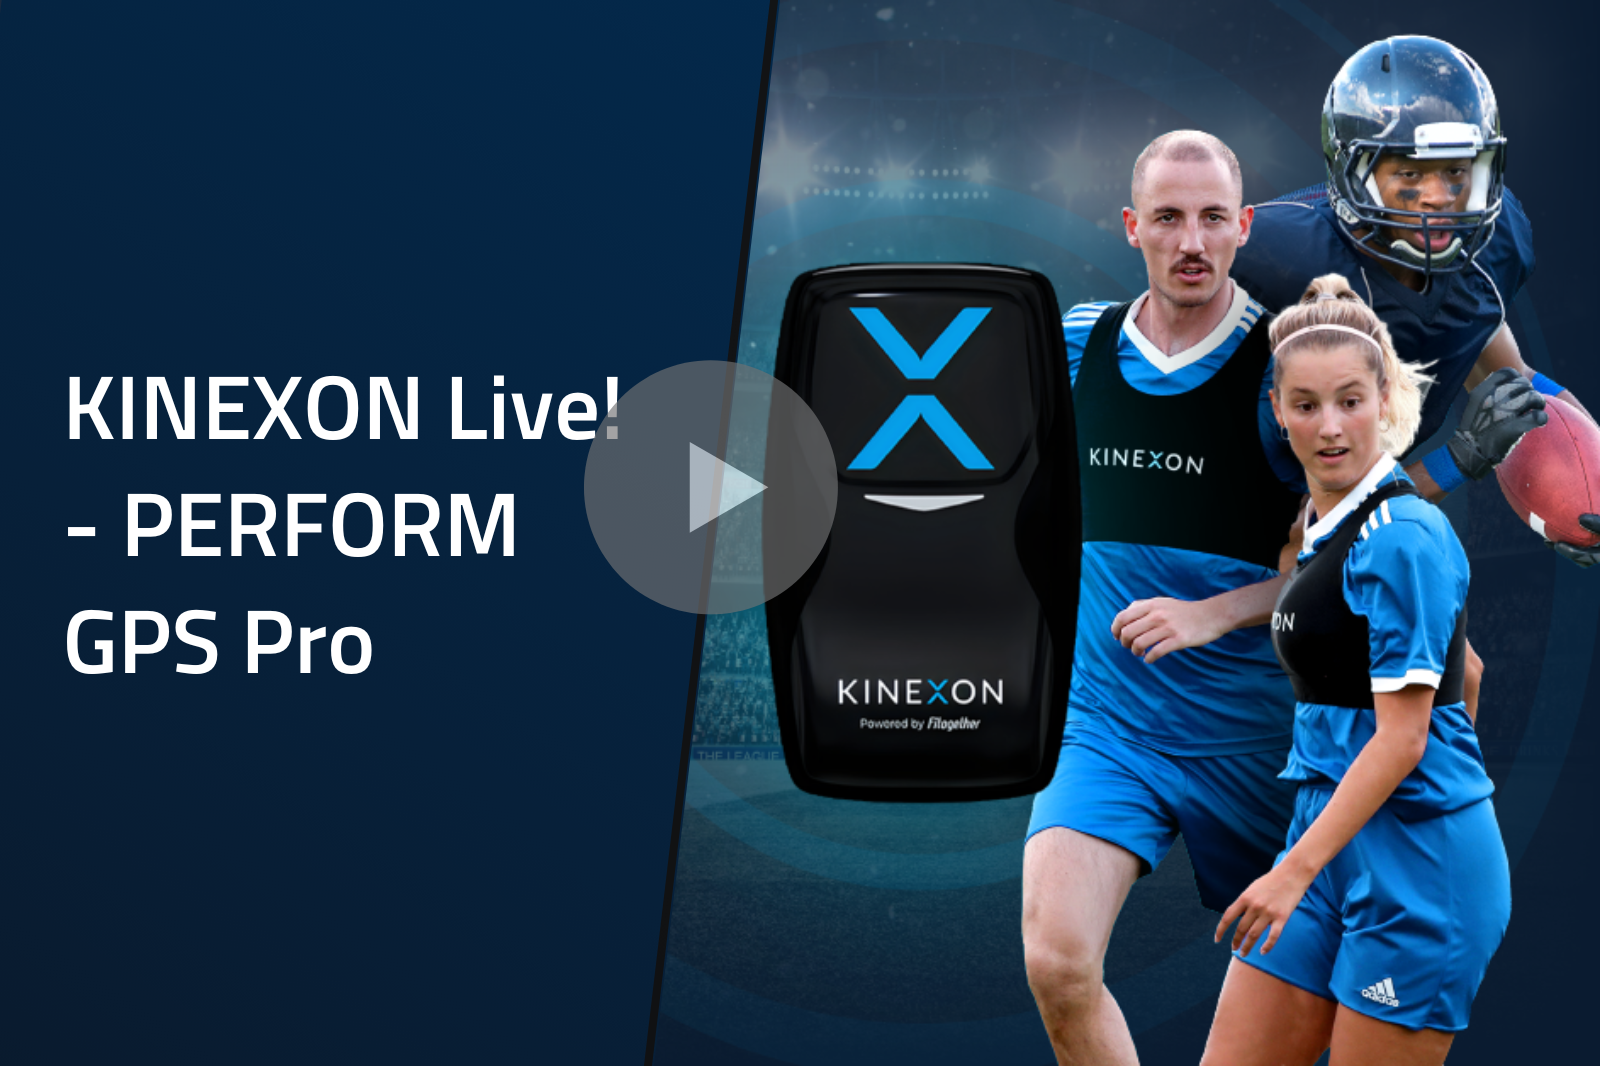 This is the cover for the Webinar explaining the Sports PERFORM GPS Pro solution.